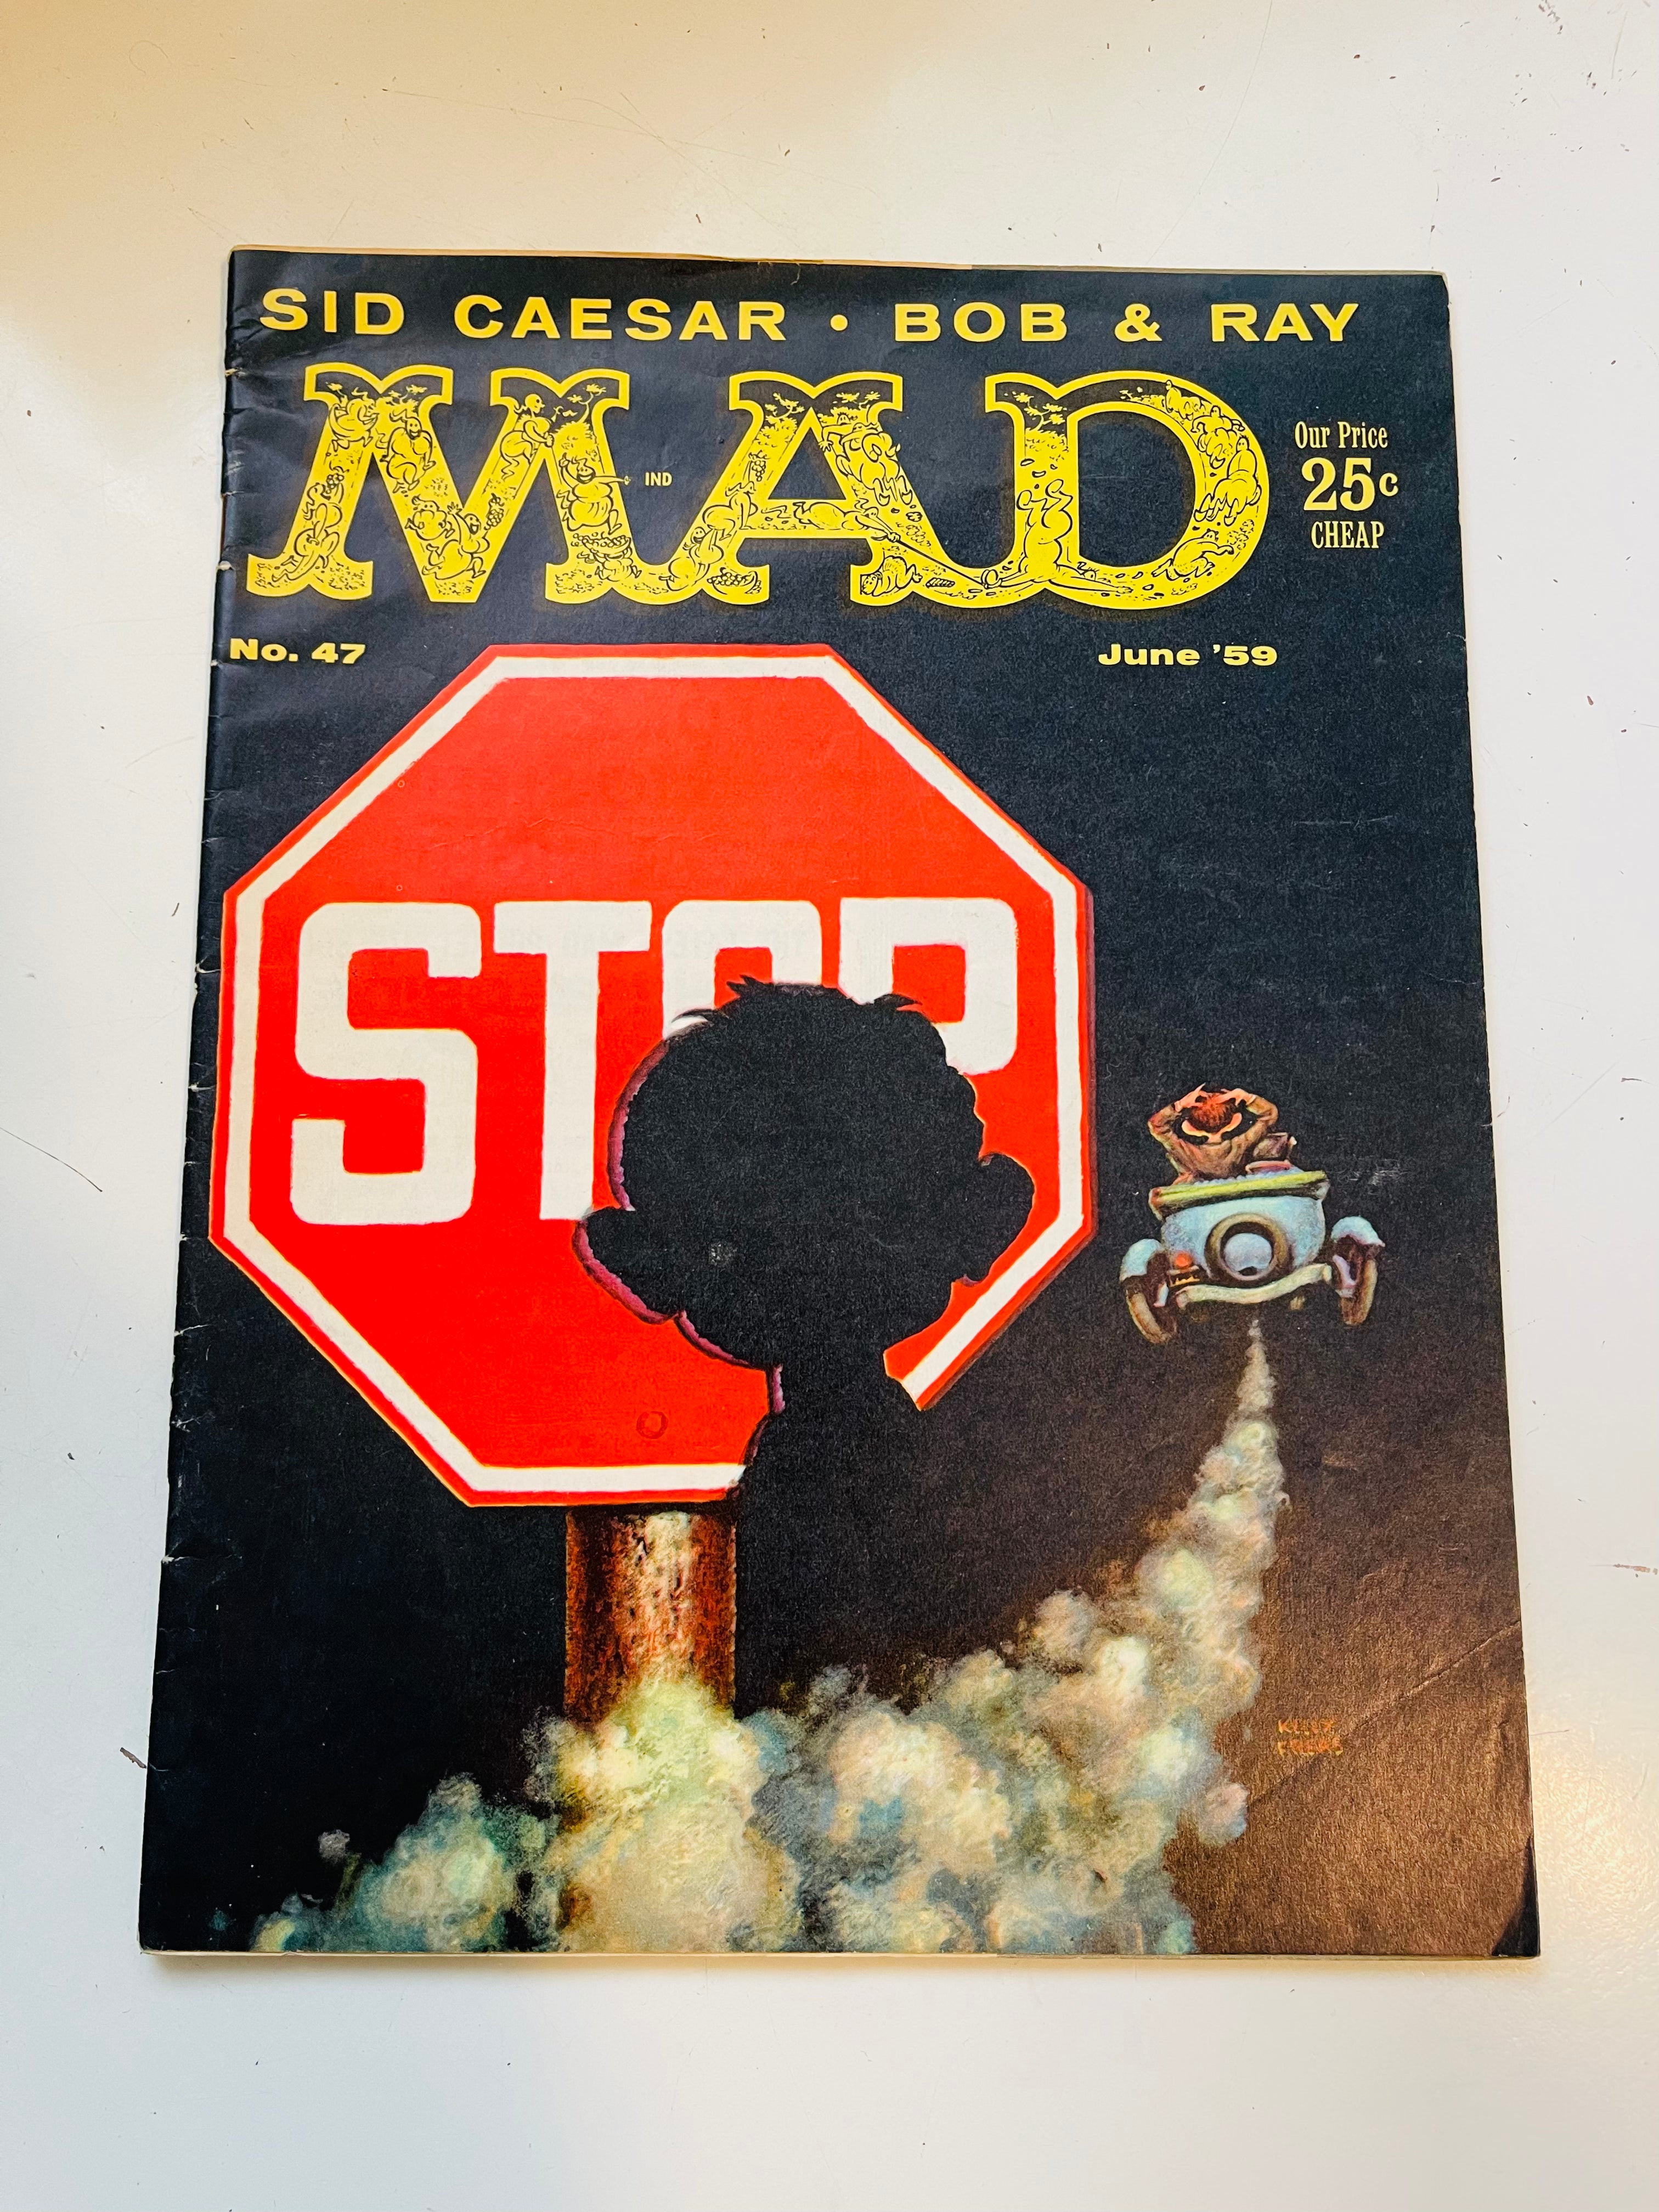 Mad Magazine #47 from 1959